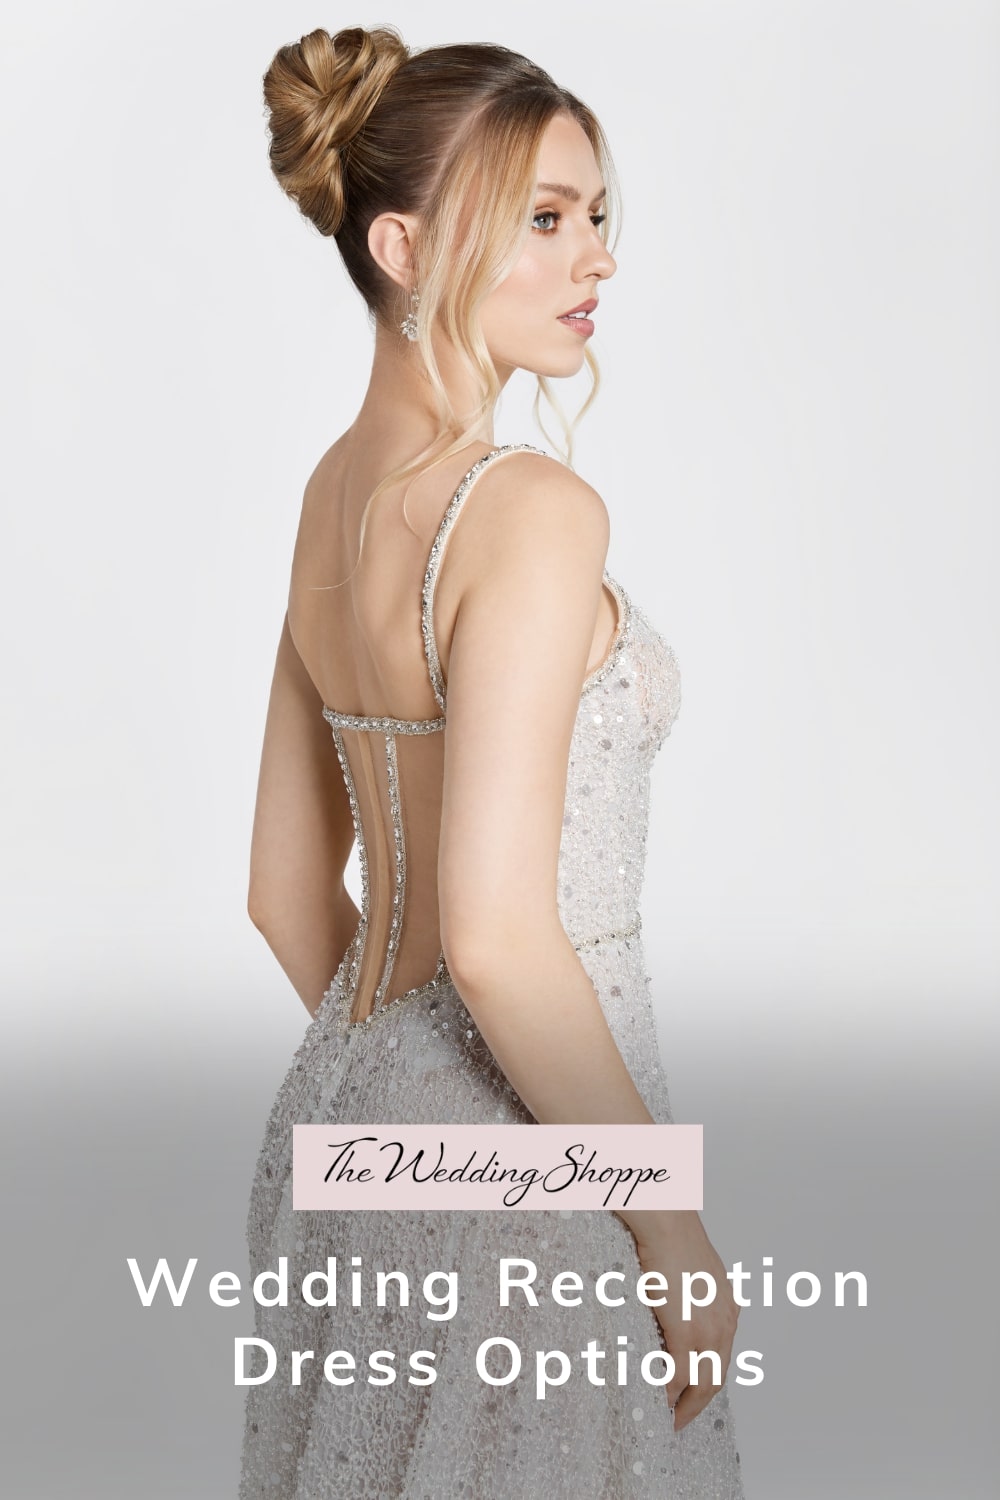 pinnable graphic for "Wedding Reception Dress Options" from The Wedding Shoppe